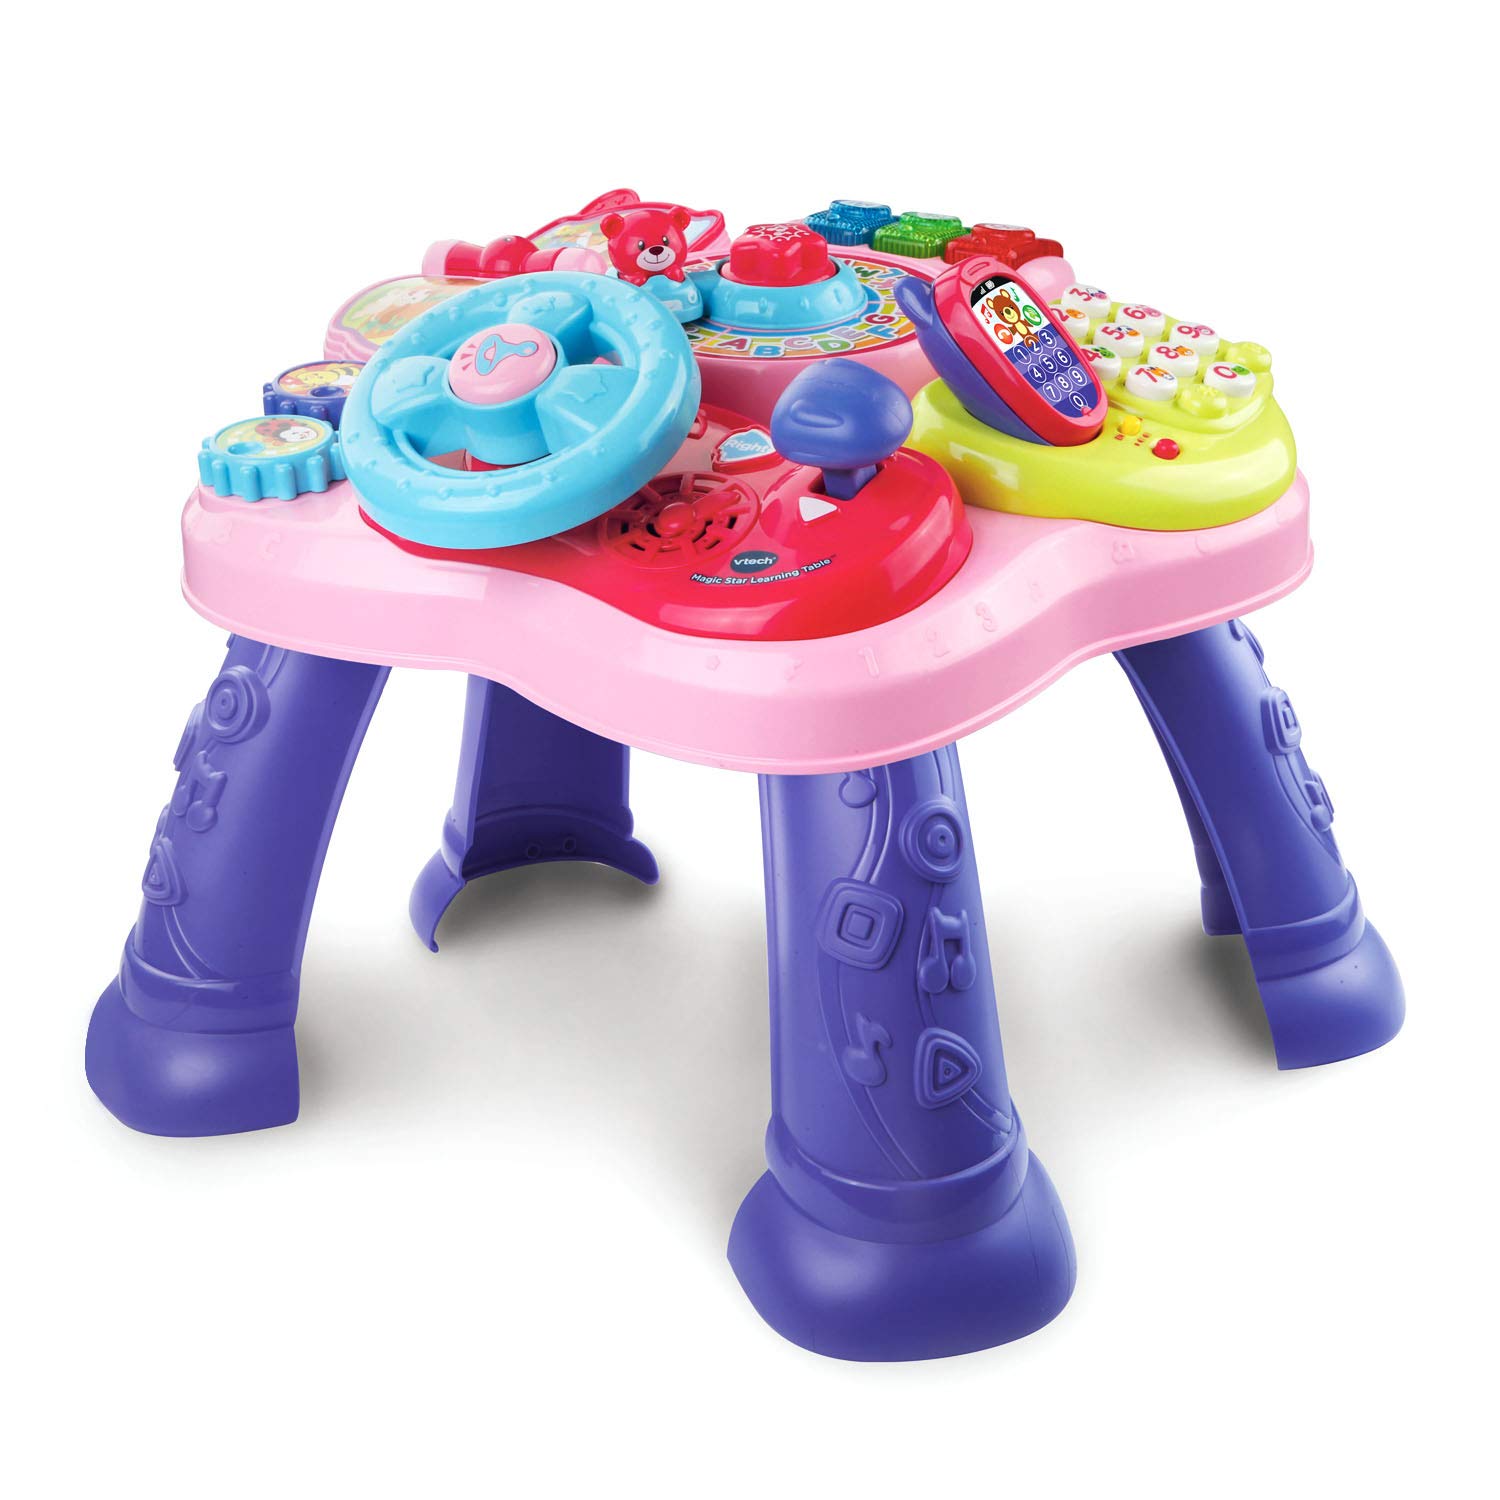 VTech Magic Star Learning Table, Pink (Frustration Free Packaging)